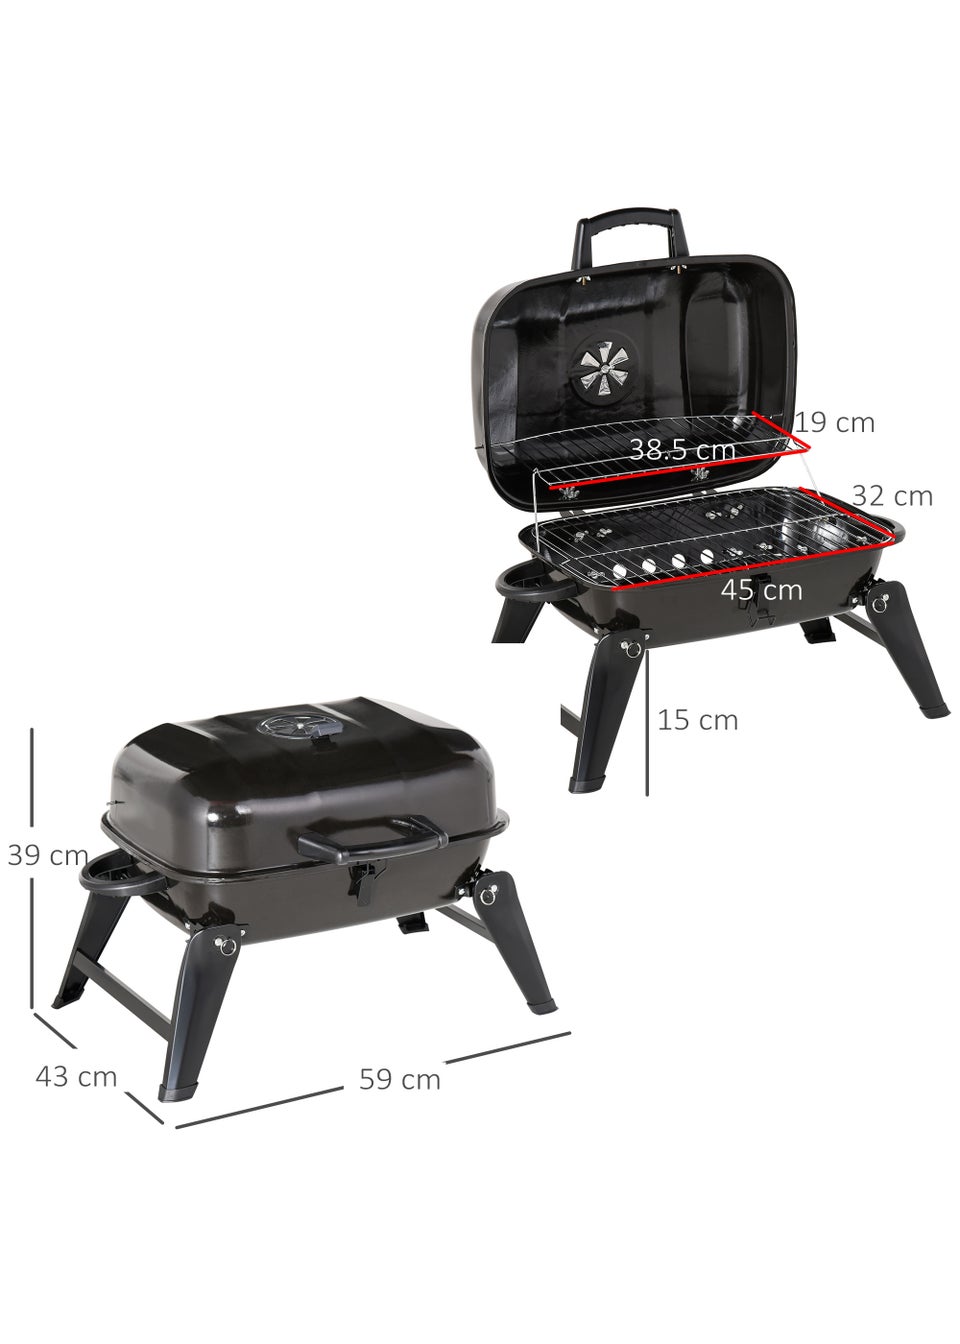 Outsunny Portable Charcoal Barbecue Grill (59cm x 43cm x 36cm)